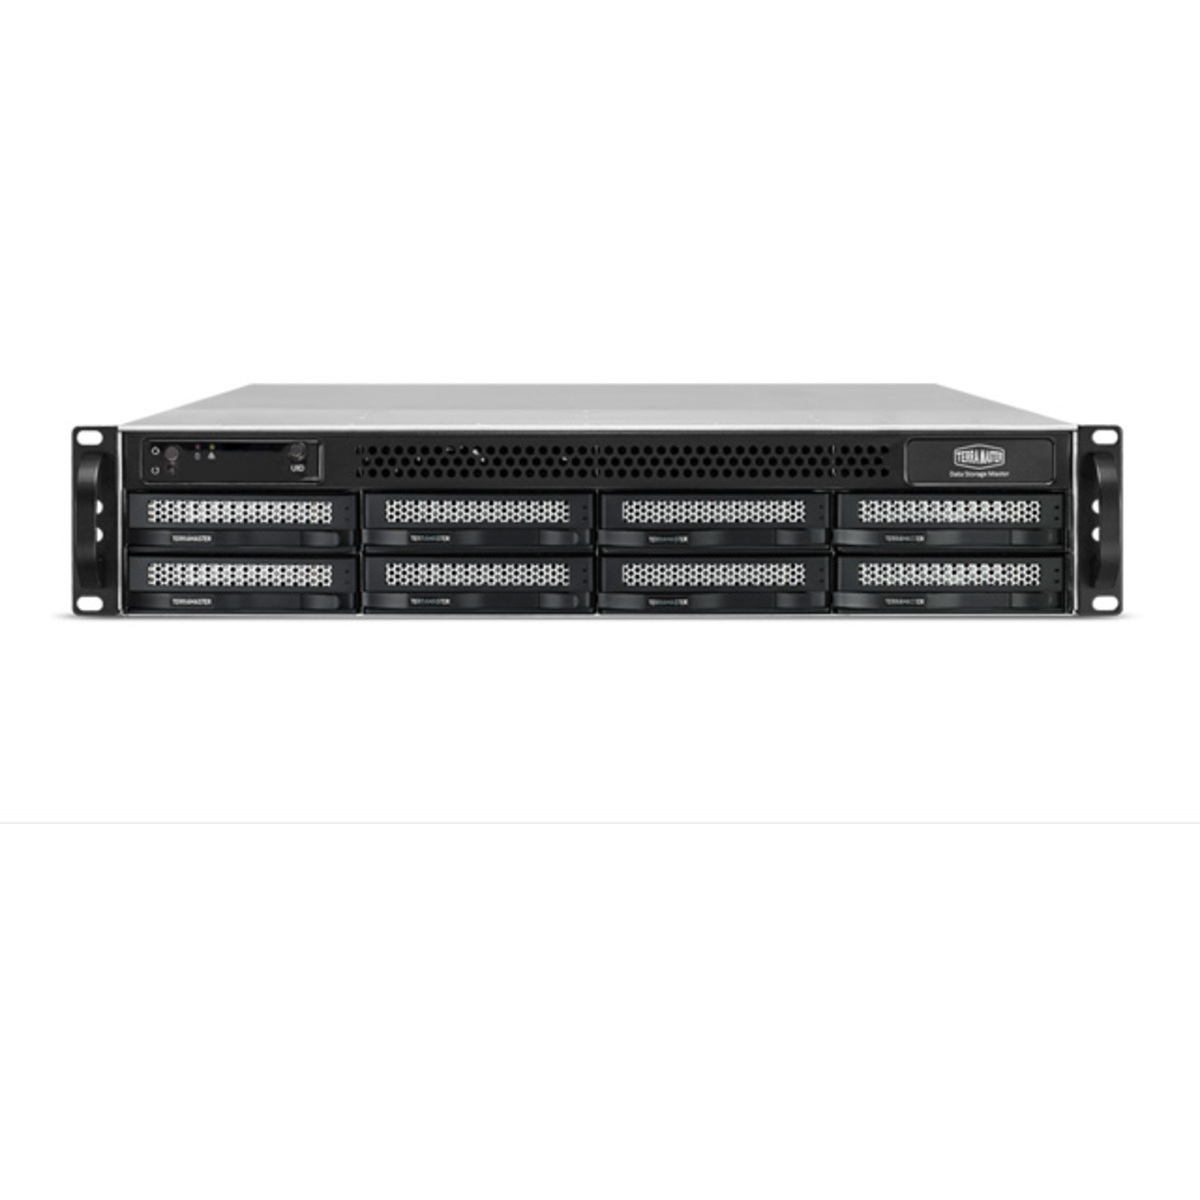 TerraMaster U8-423 168tb 8-Bay RackMount Multimedia / Power User / Business NAS - Network Attached Storage Device 7x24tb Seagate IronWolf Pro ST24000NT002 3.5 7200rpm SATA 6Gb/s HDD NAS Class Drives Installed - Burn-In Tested - FREE RAM UPGRADE U8-423